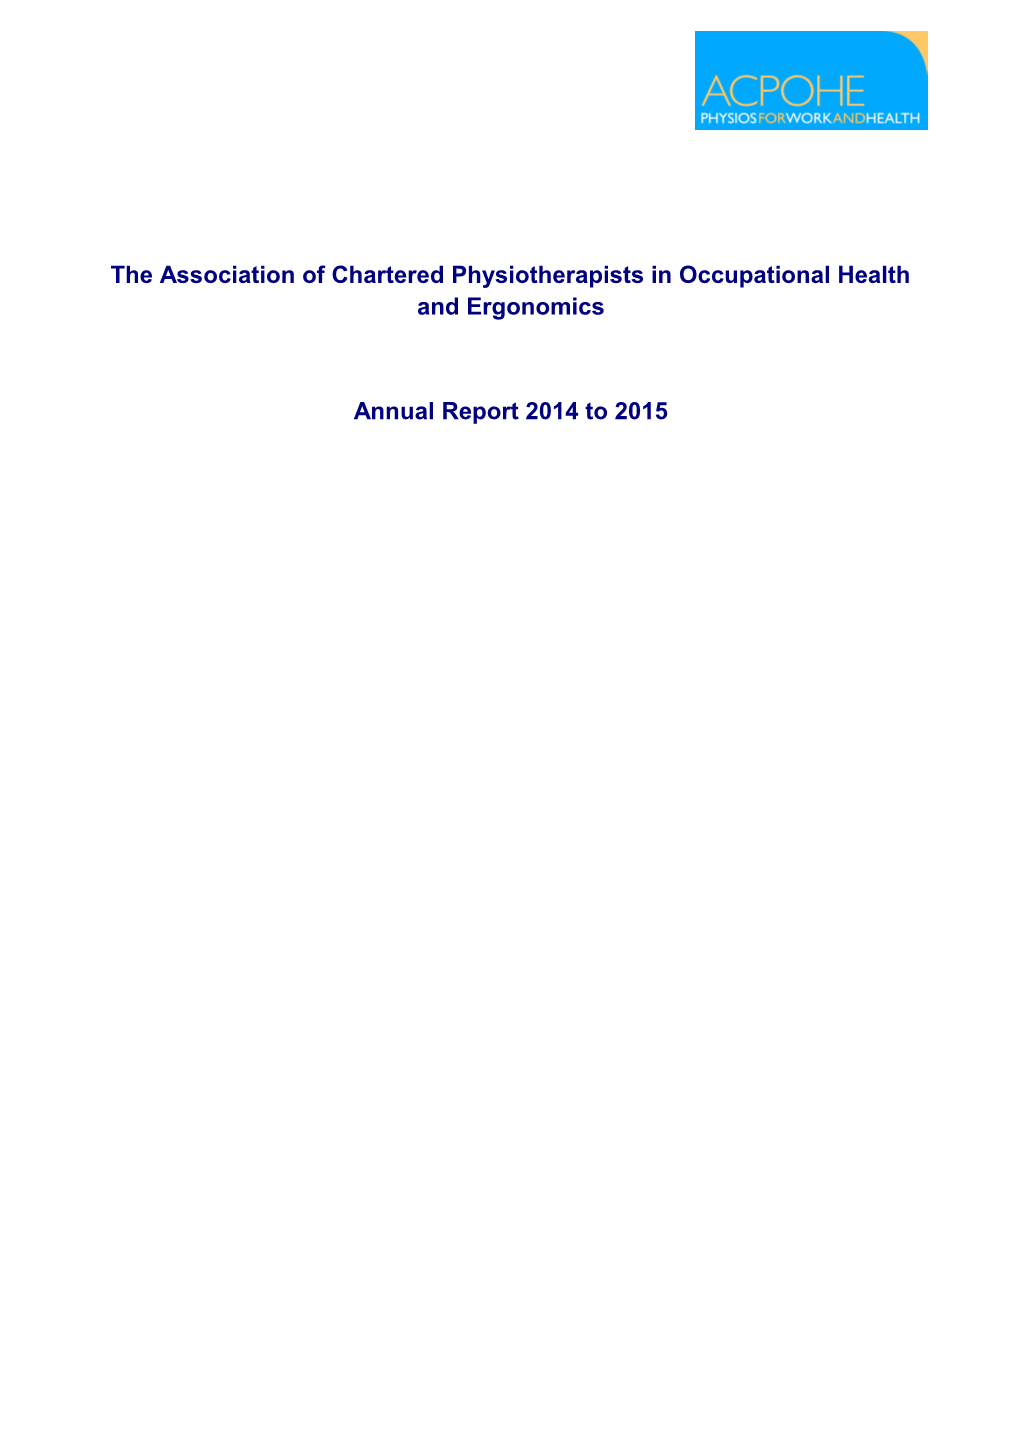 The Association of Chartered Physiotherapists in Occupational Health and Ergonomics